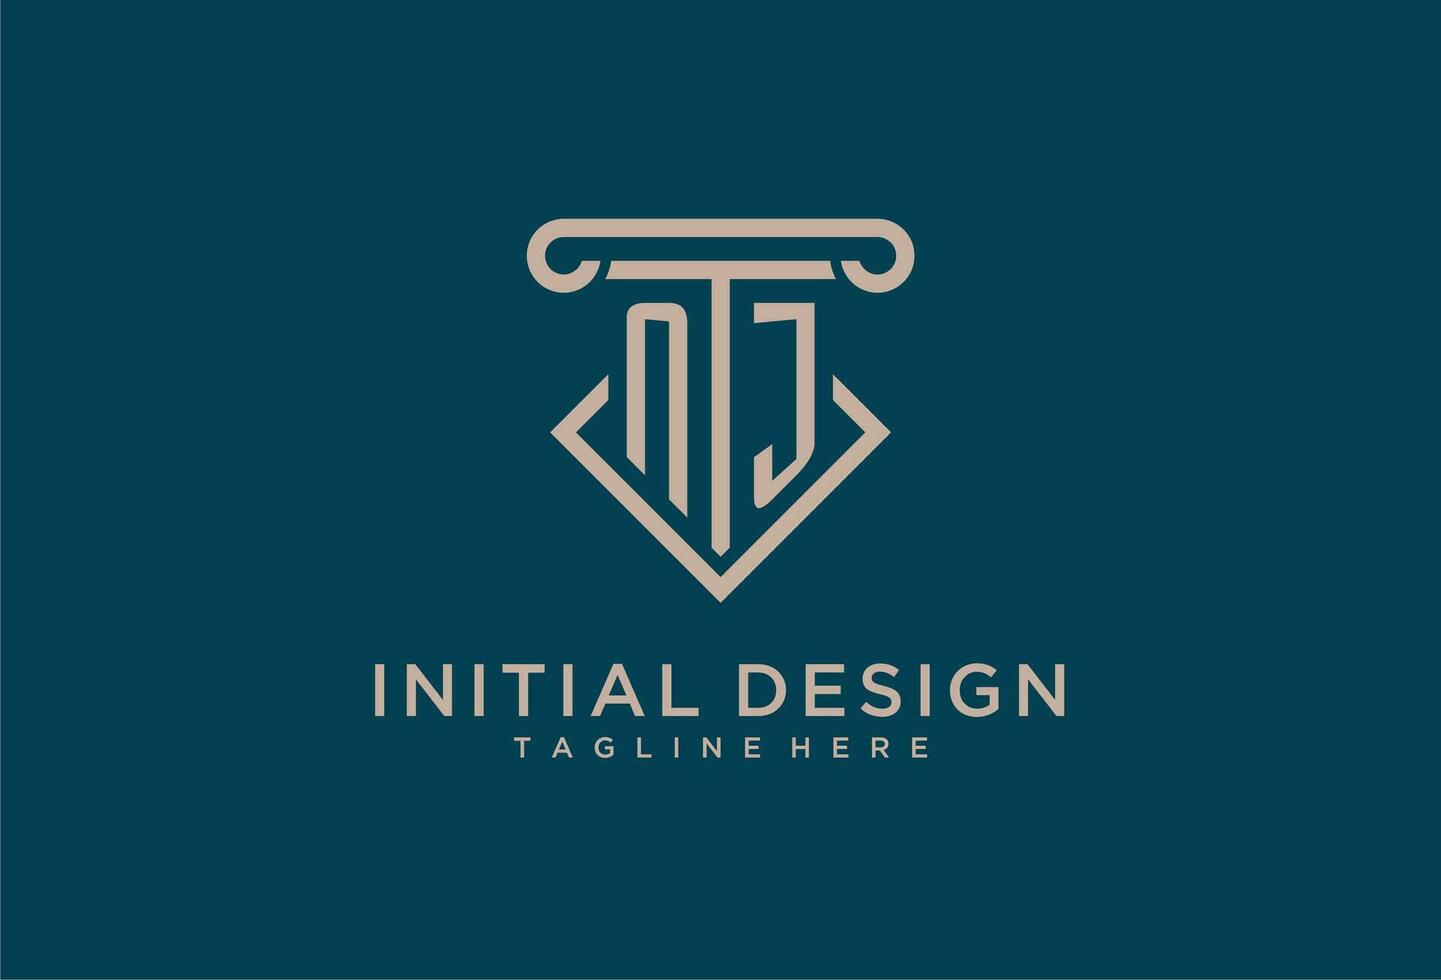 NJ initial with pillar icon design, clean and modern attorney, legal firm logo vector